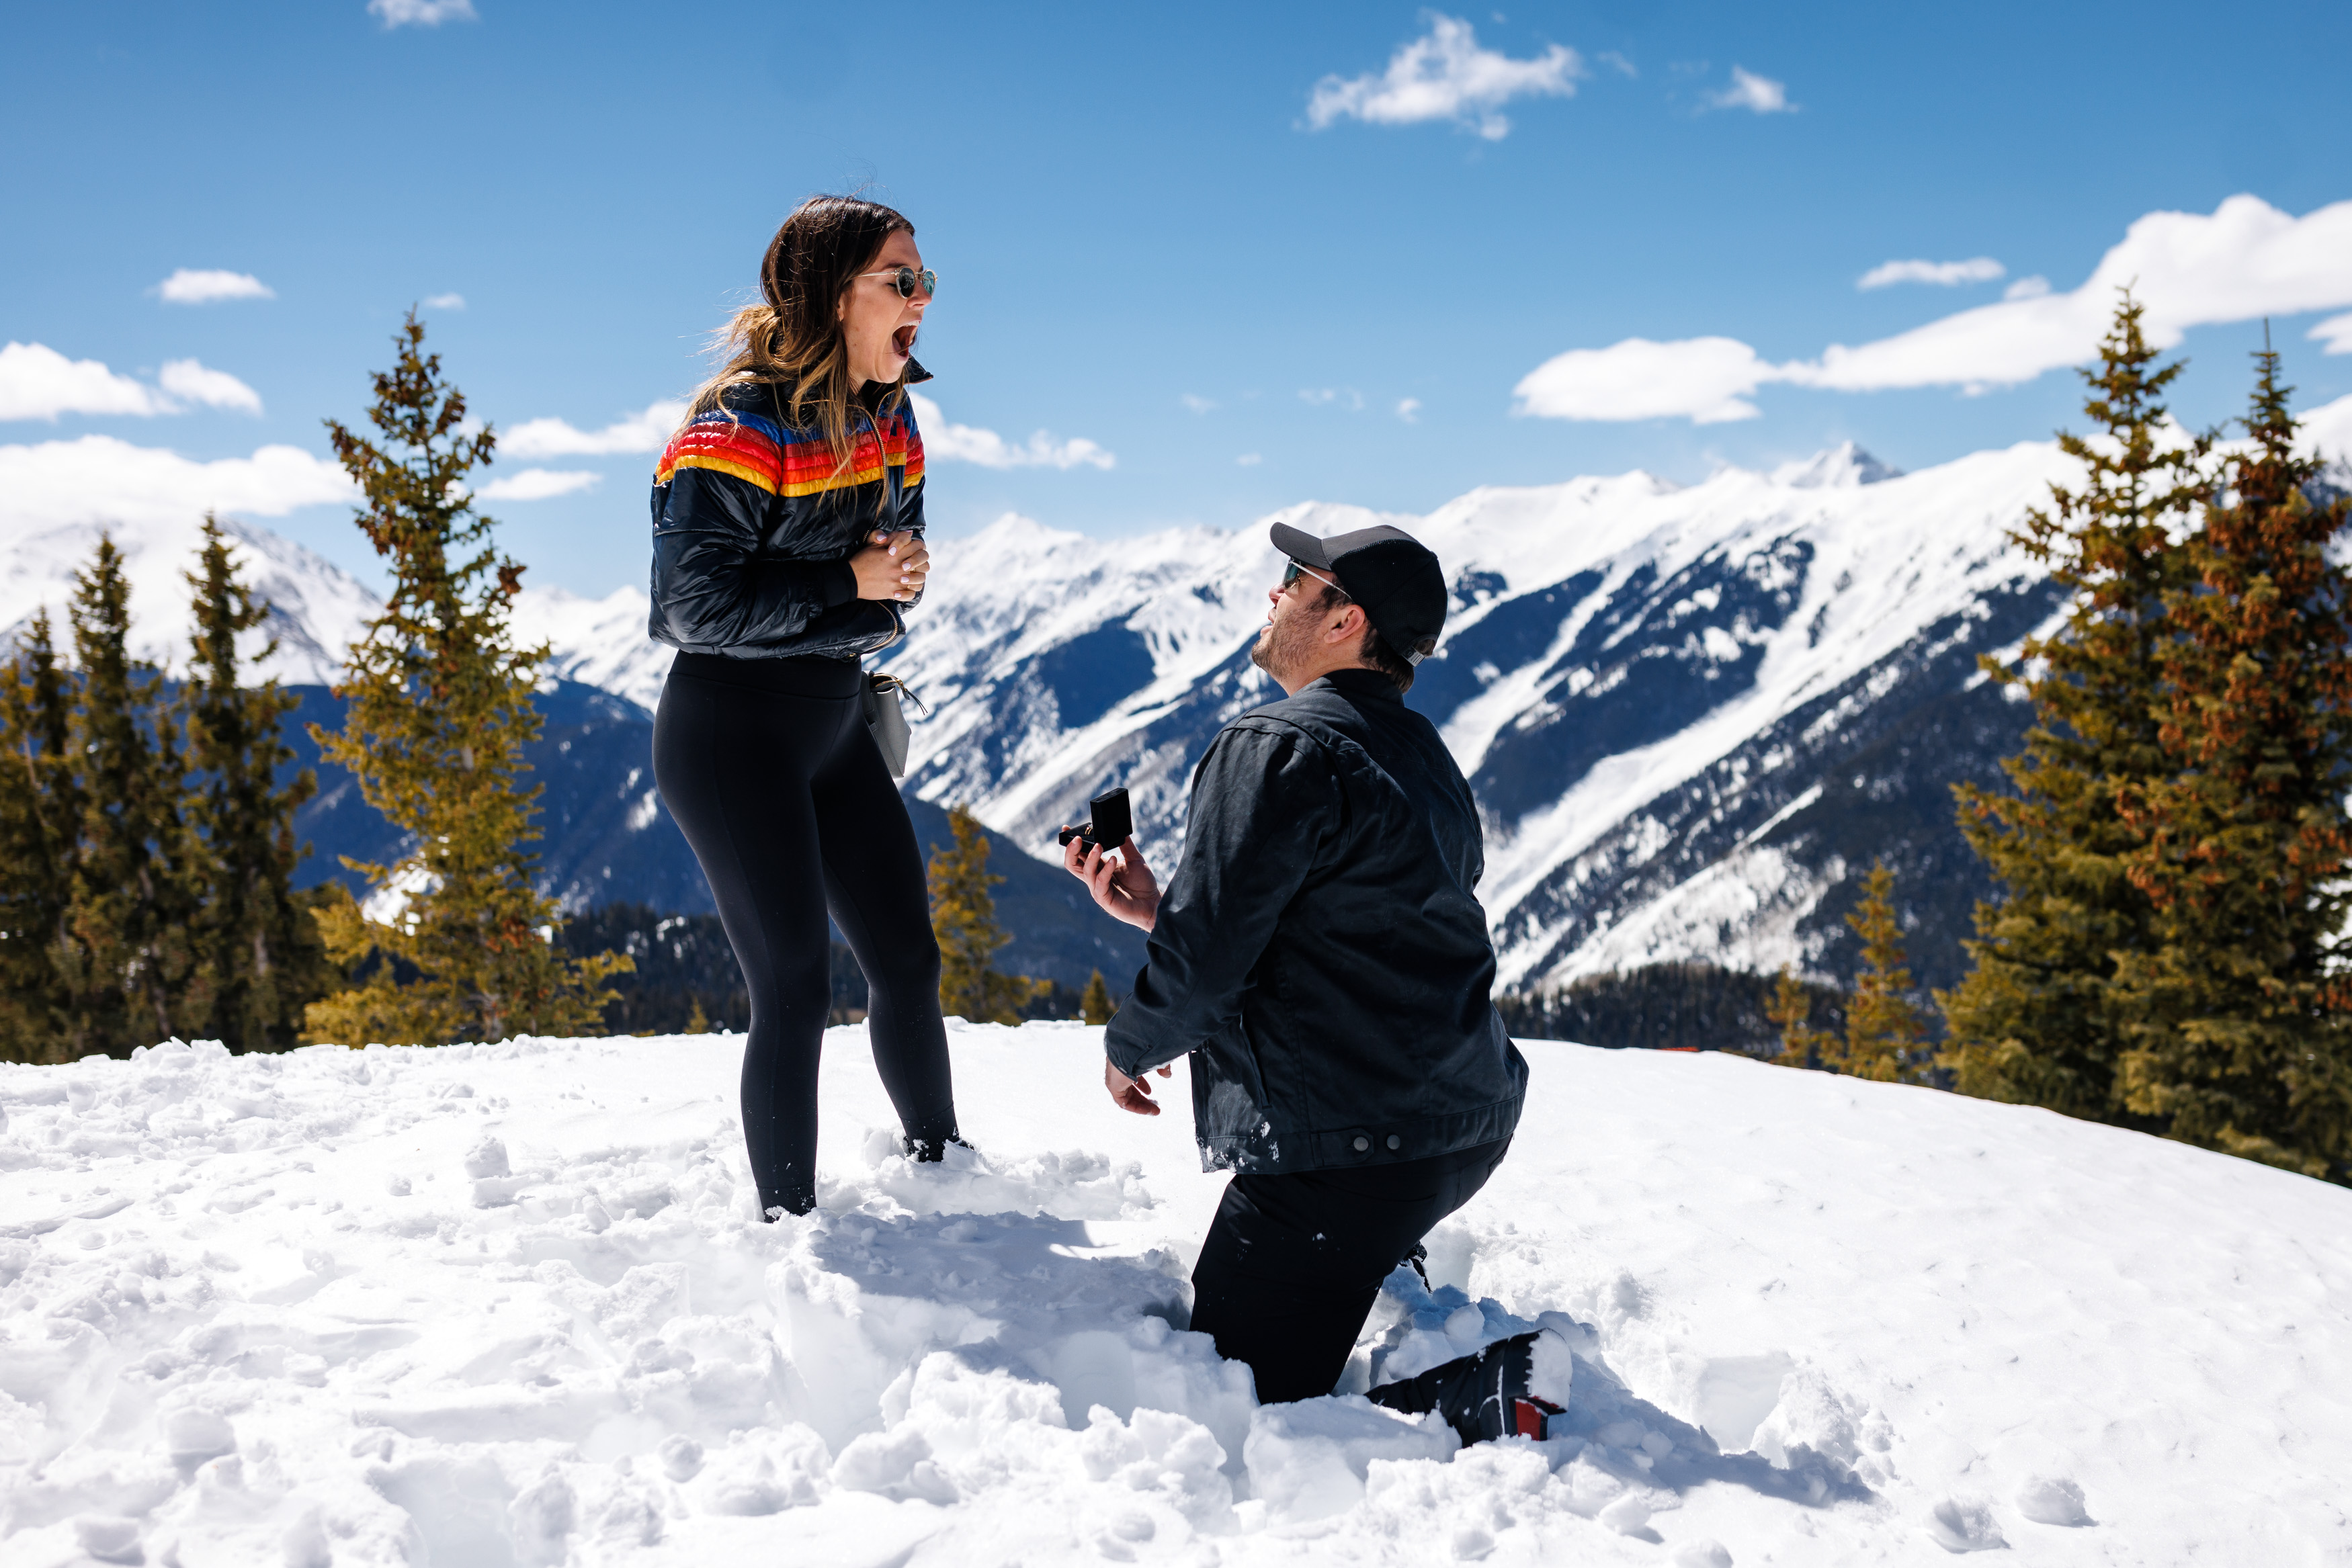 Zach on one knee with wedding ring in hand as he asks Molley to marry him on top of Aspen Mountain.